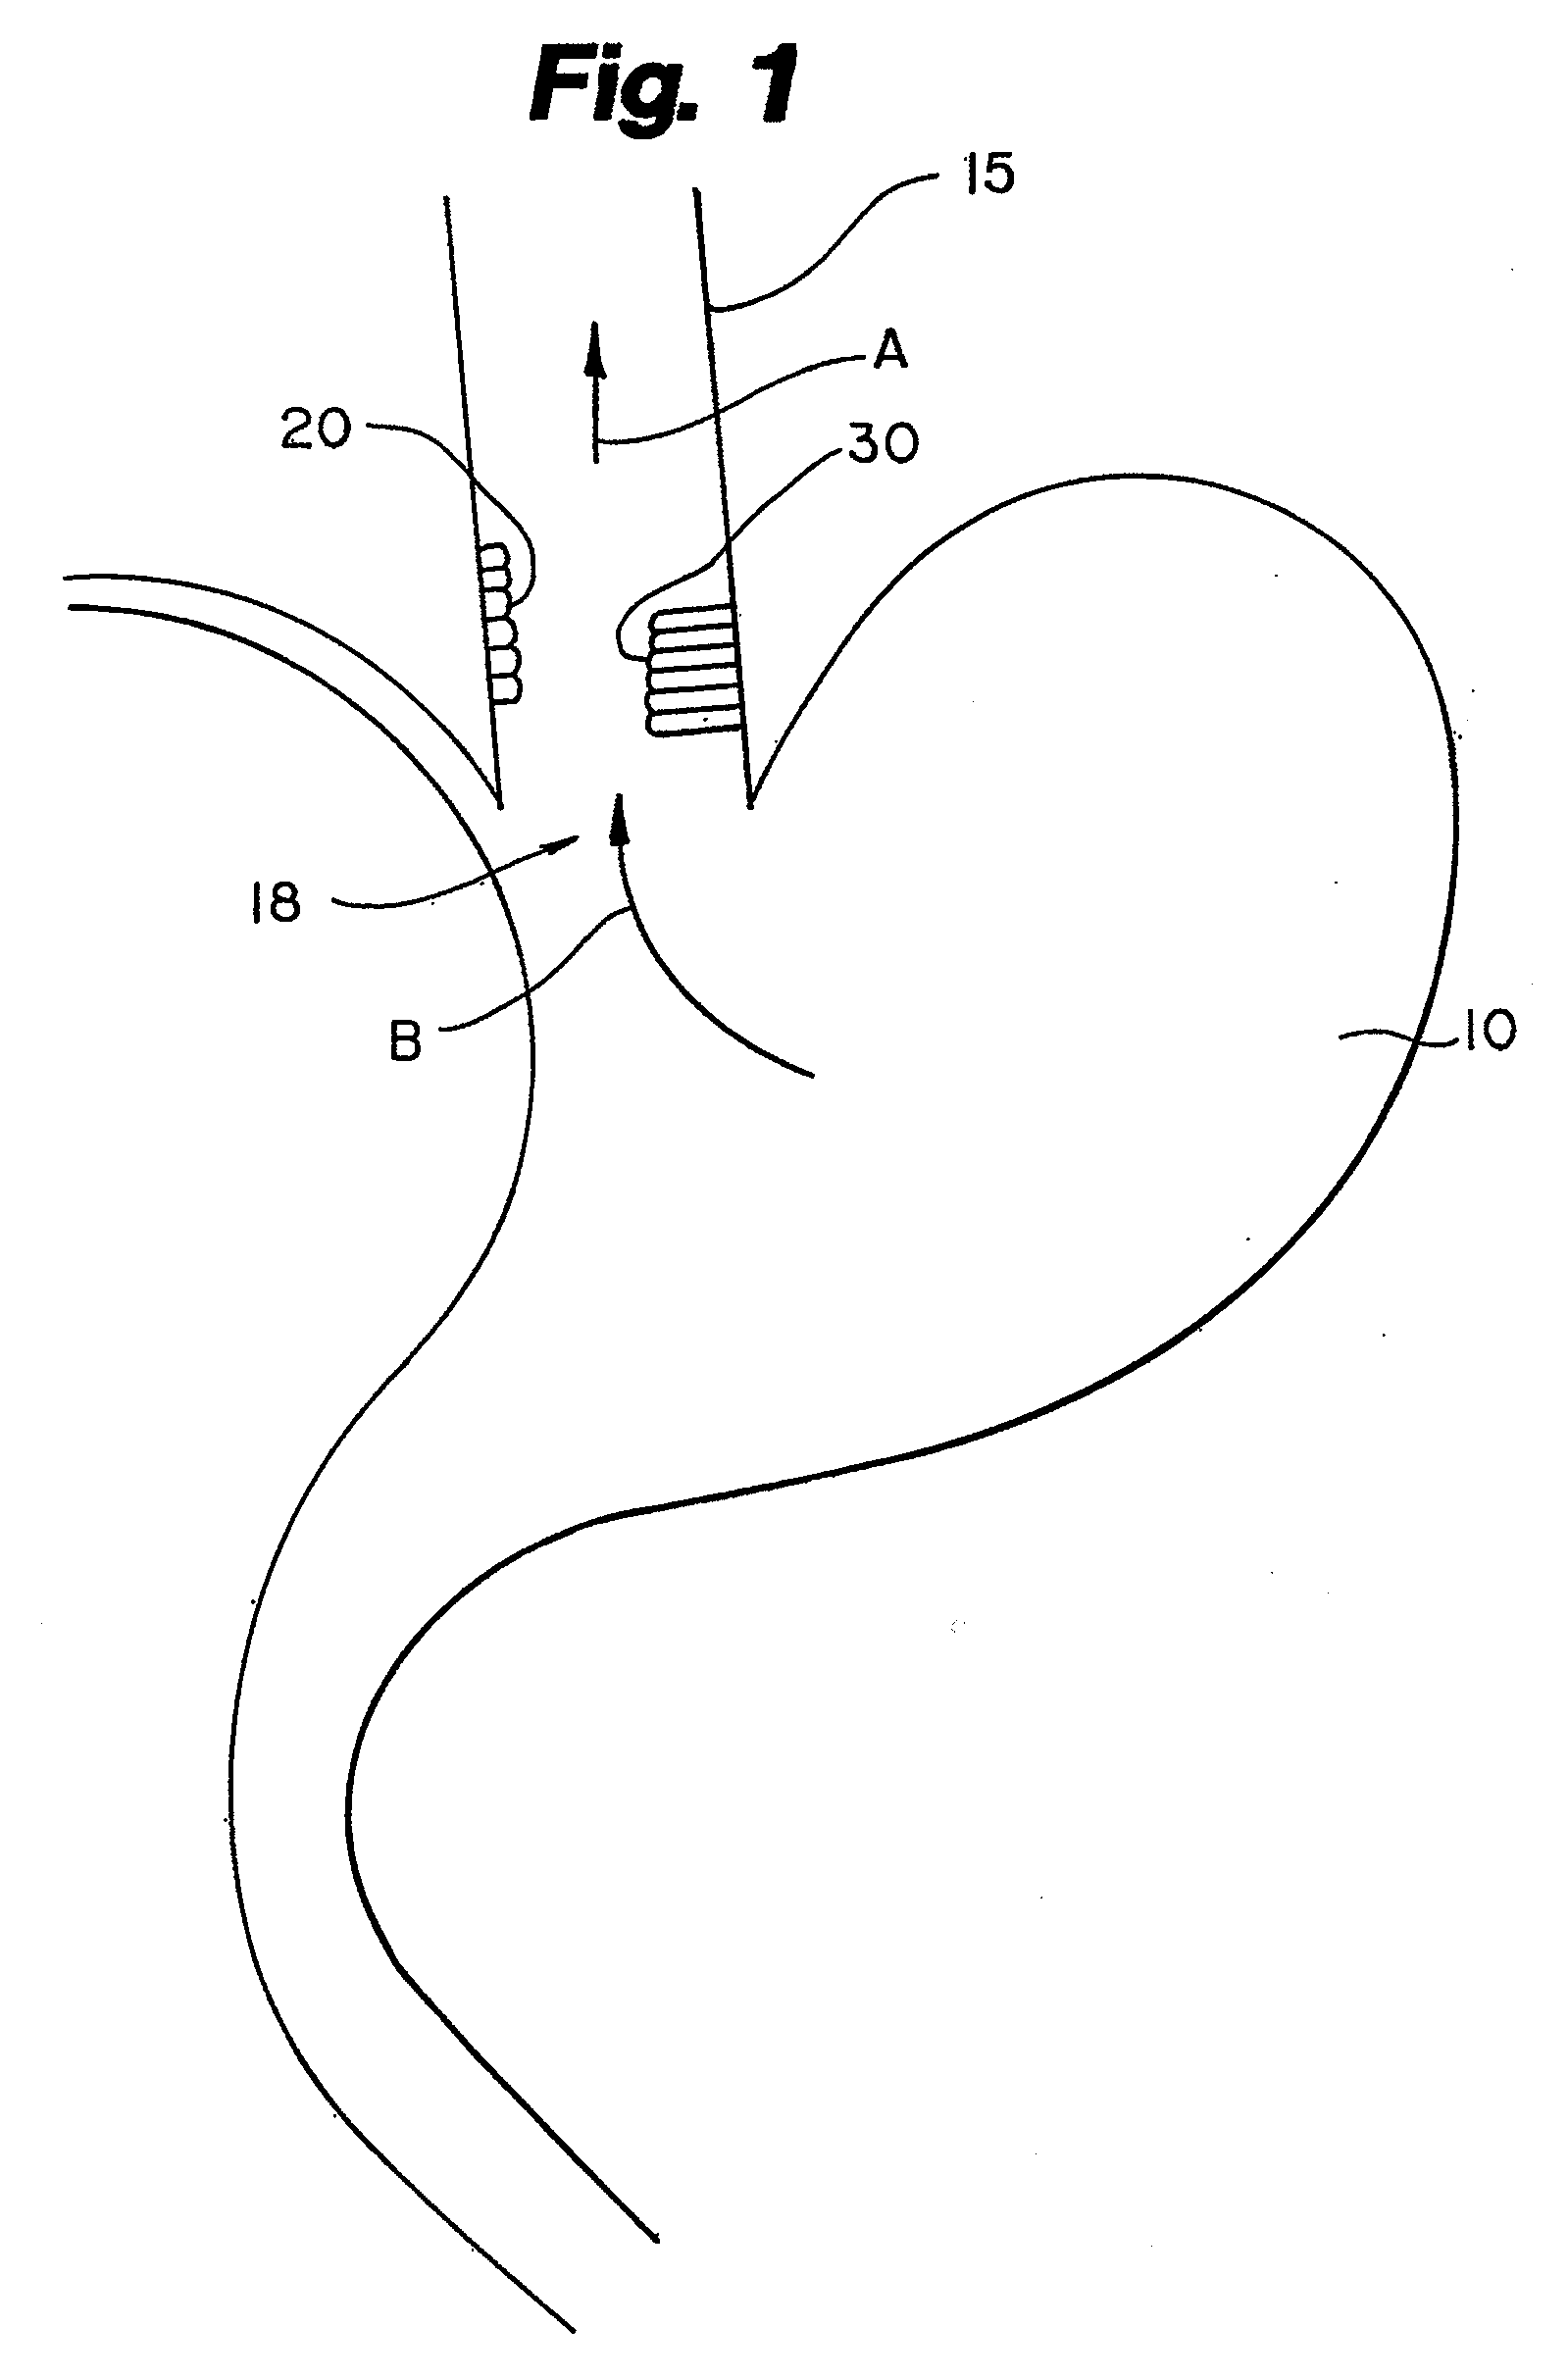 System and method of treating abnormal tissue in the human esophagus